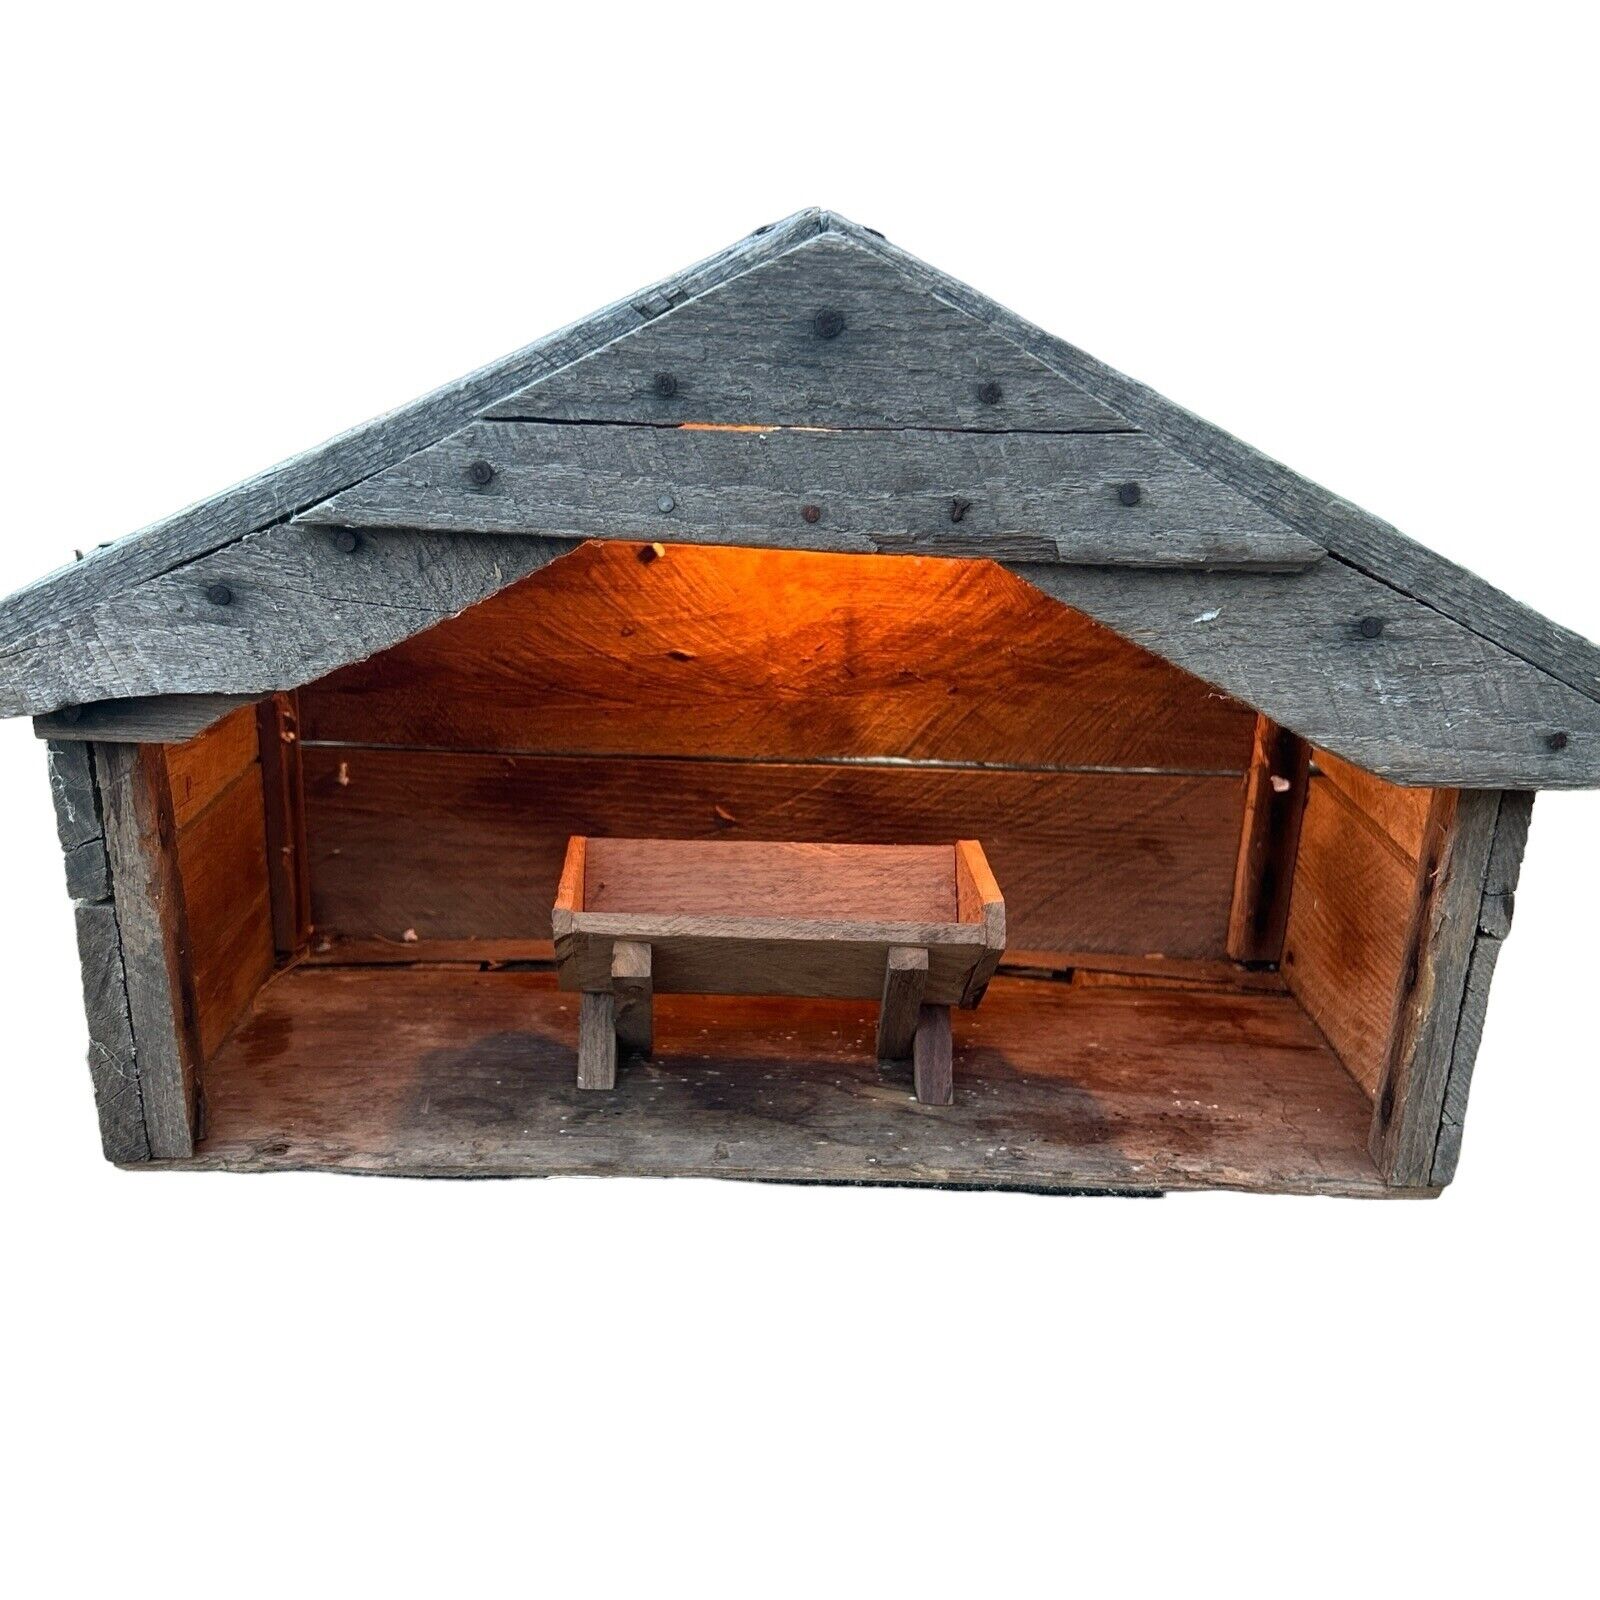 Handmade RUSTIC WOODEN Nativity Scene Vintage STABLE BARN With Manger And Light